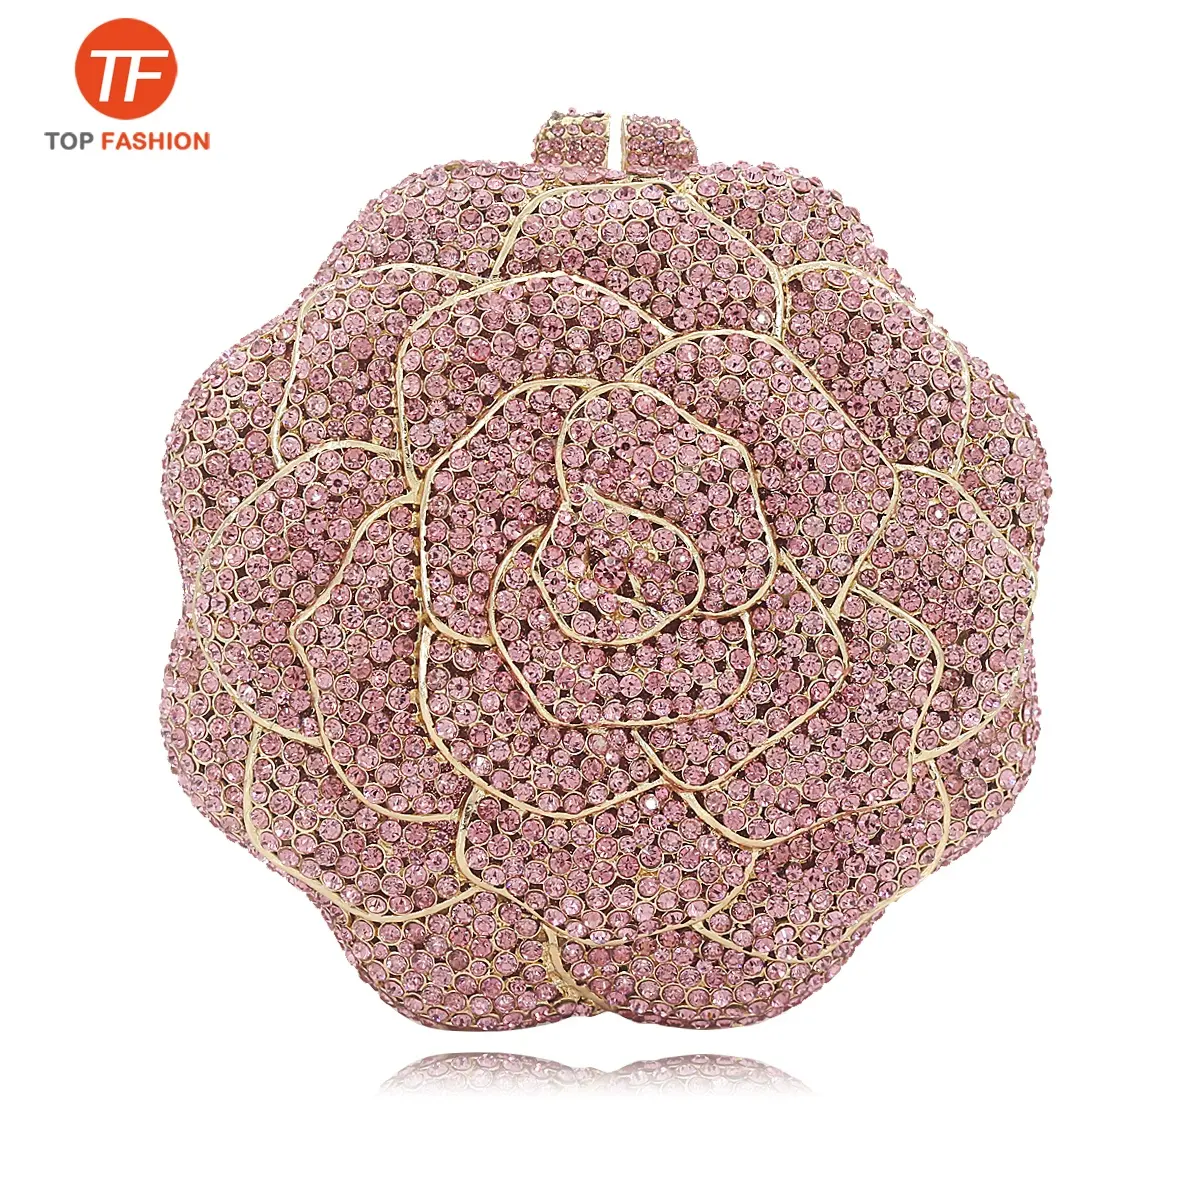 China Factory Wholesales Luxury Crystal Rhinestone Clutch Evening Bag Wedding 3D Rose Hollow Out Purse